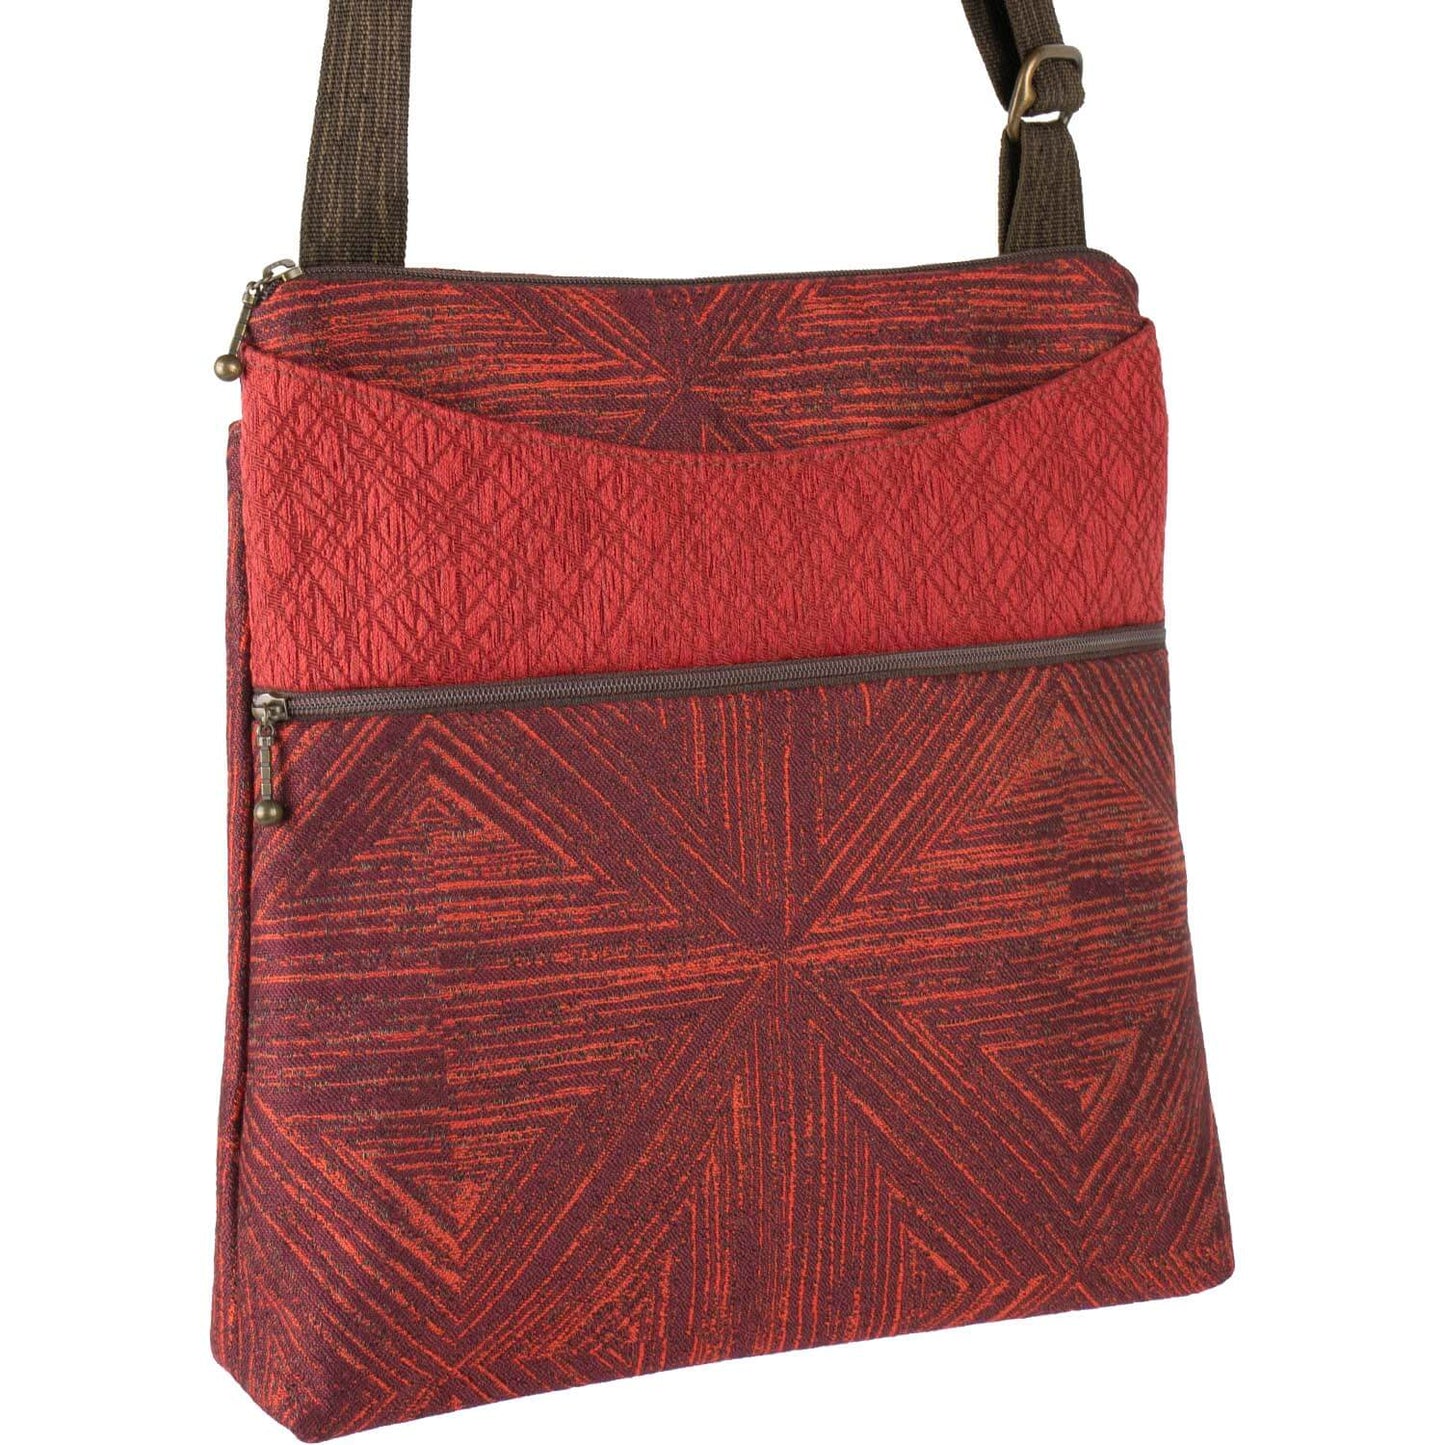 Spree Bag, Heartwood Red